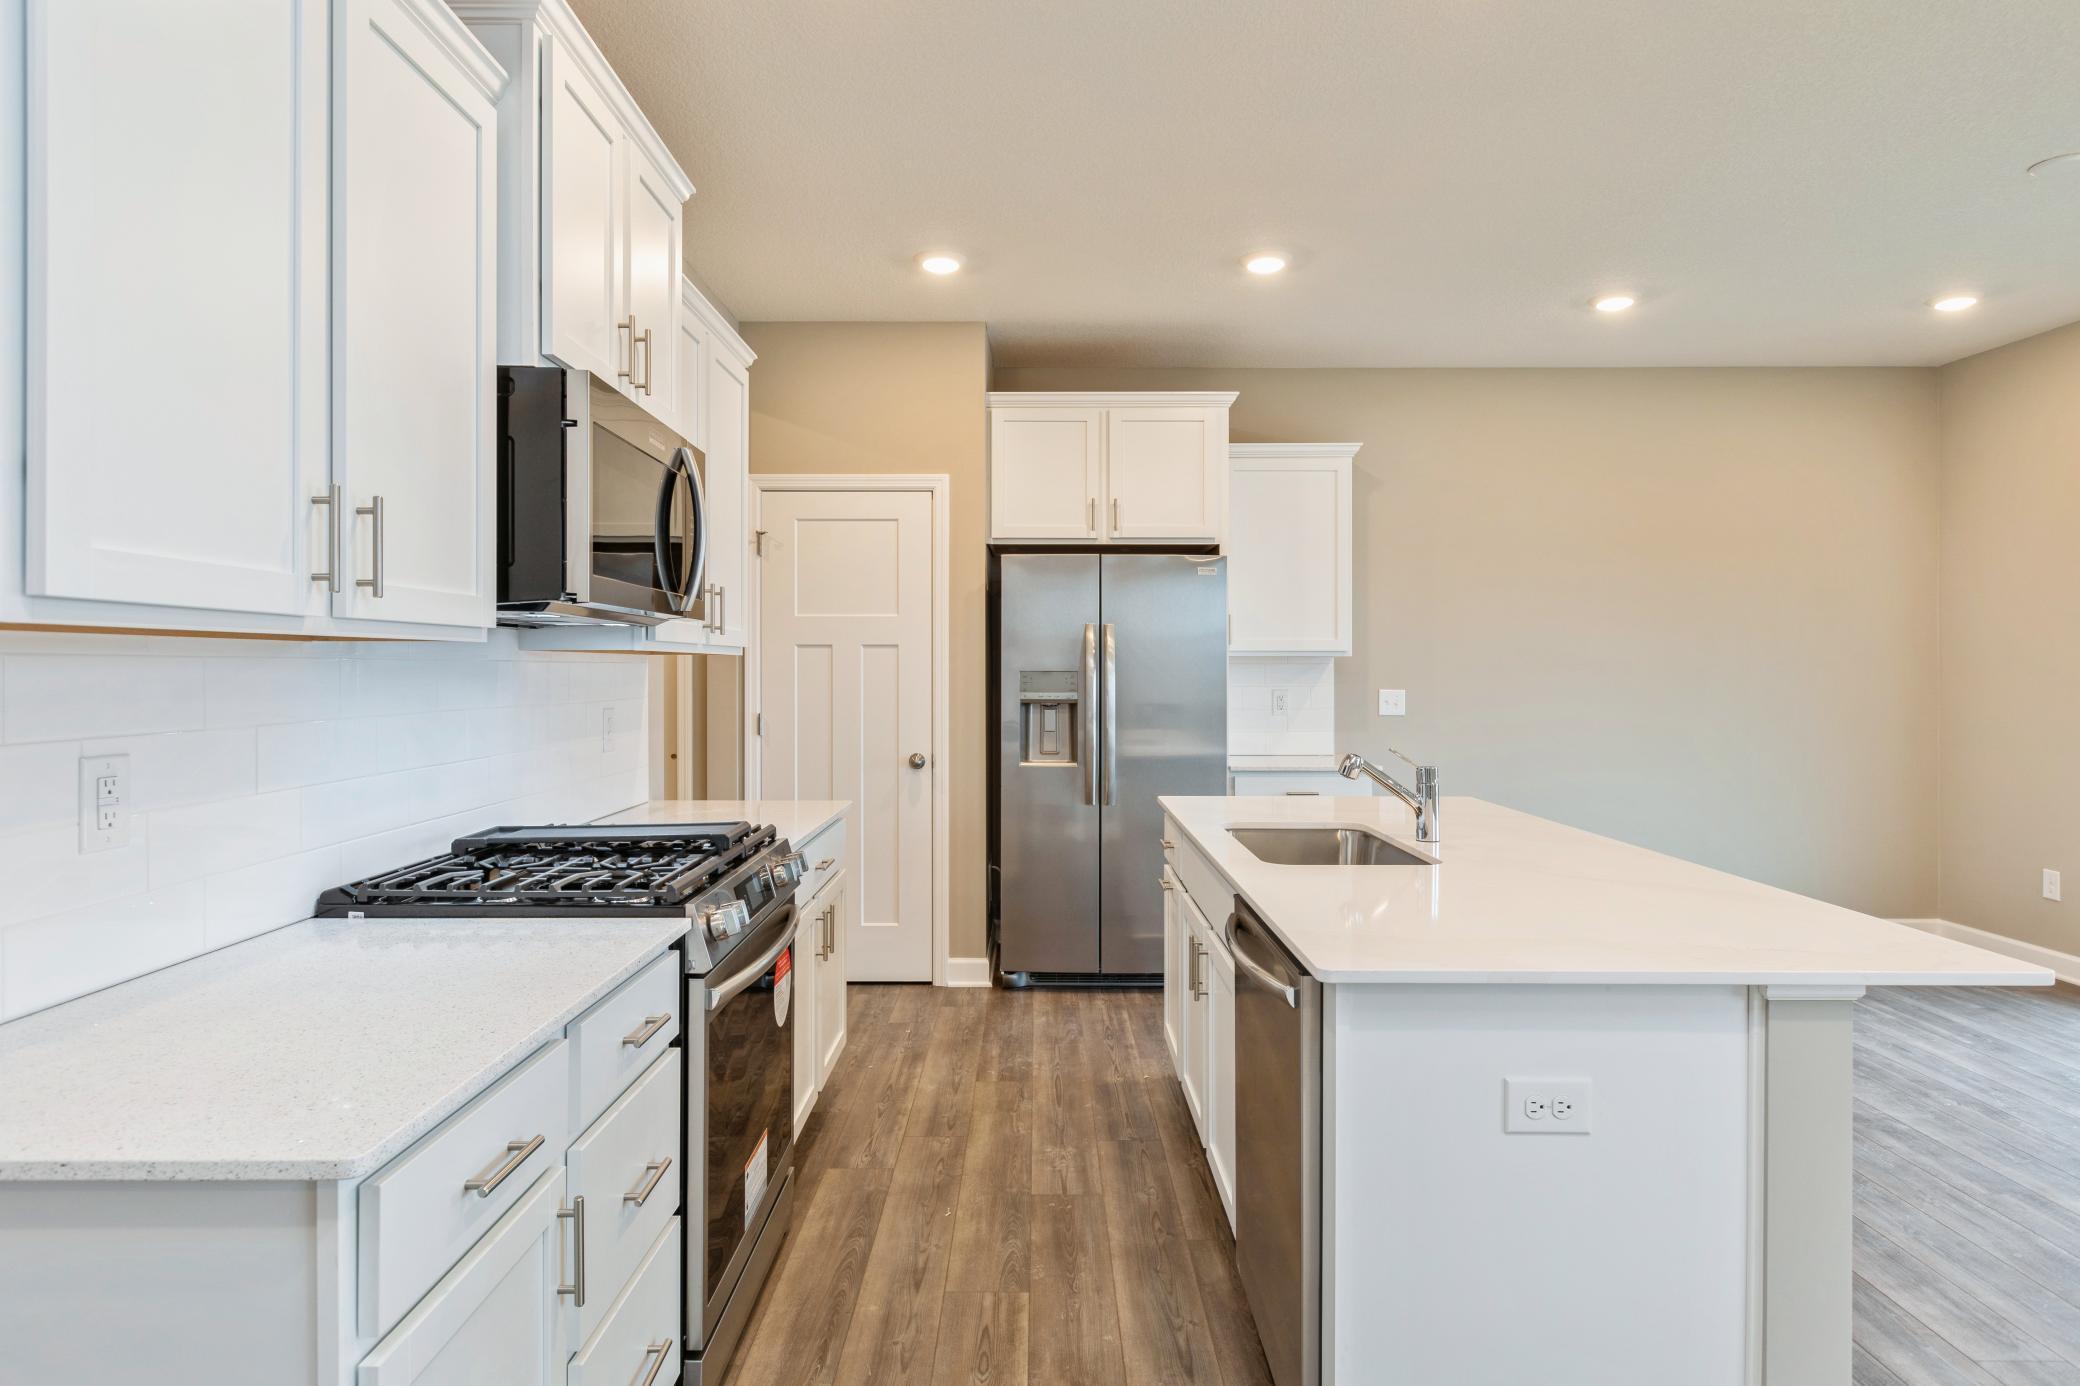 (Photo of similar home, finishes will vary) Welcome to the Glacier! This spacious kitchen includes a large center island, quartz countertops, recessed lighting, LVP wood floors, stainless appliances and more.